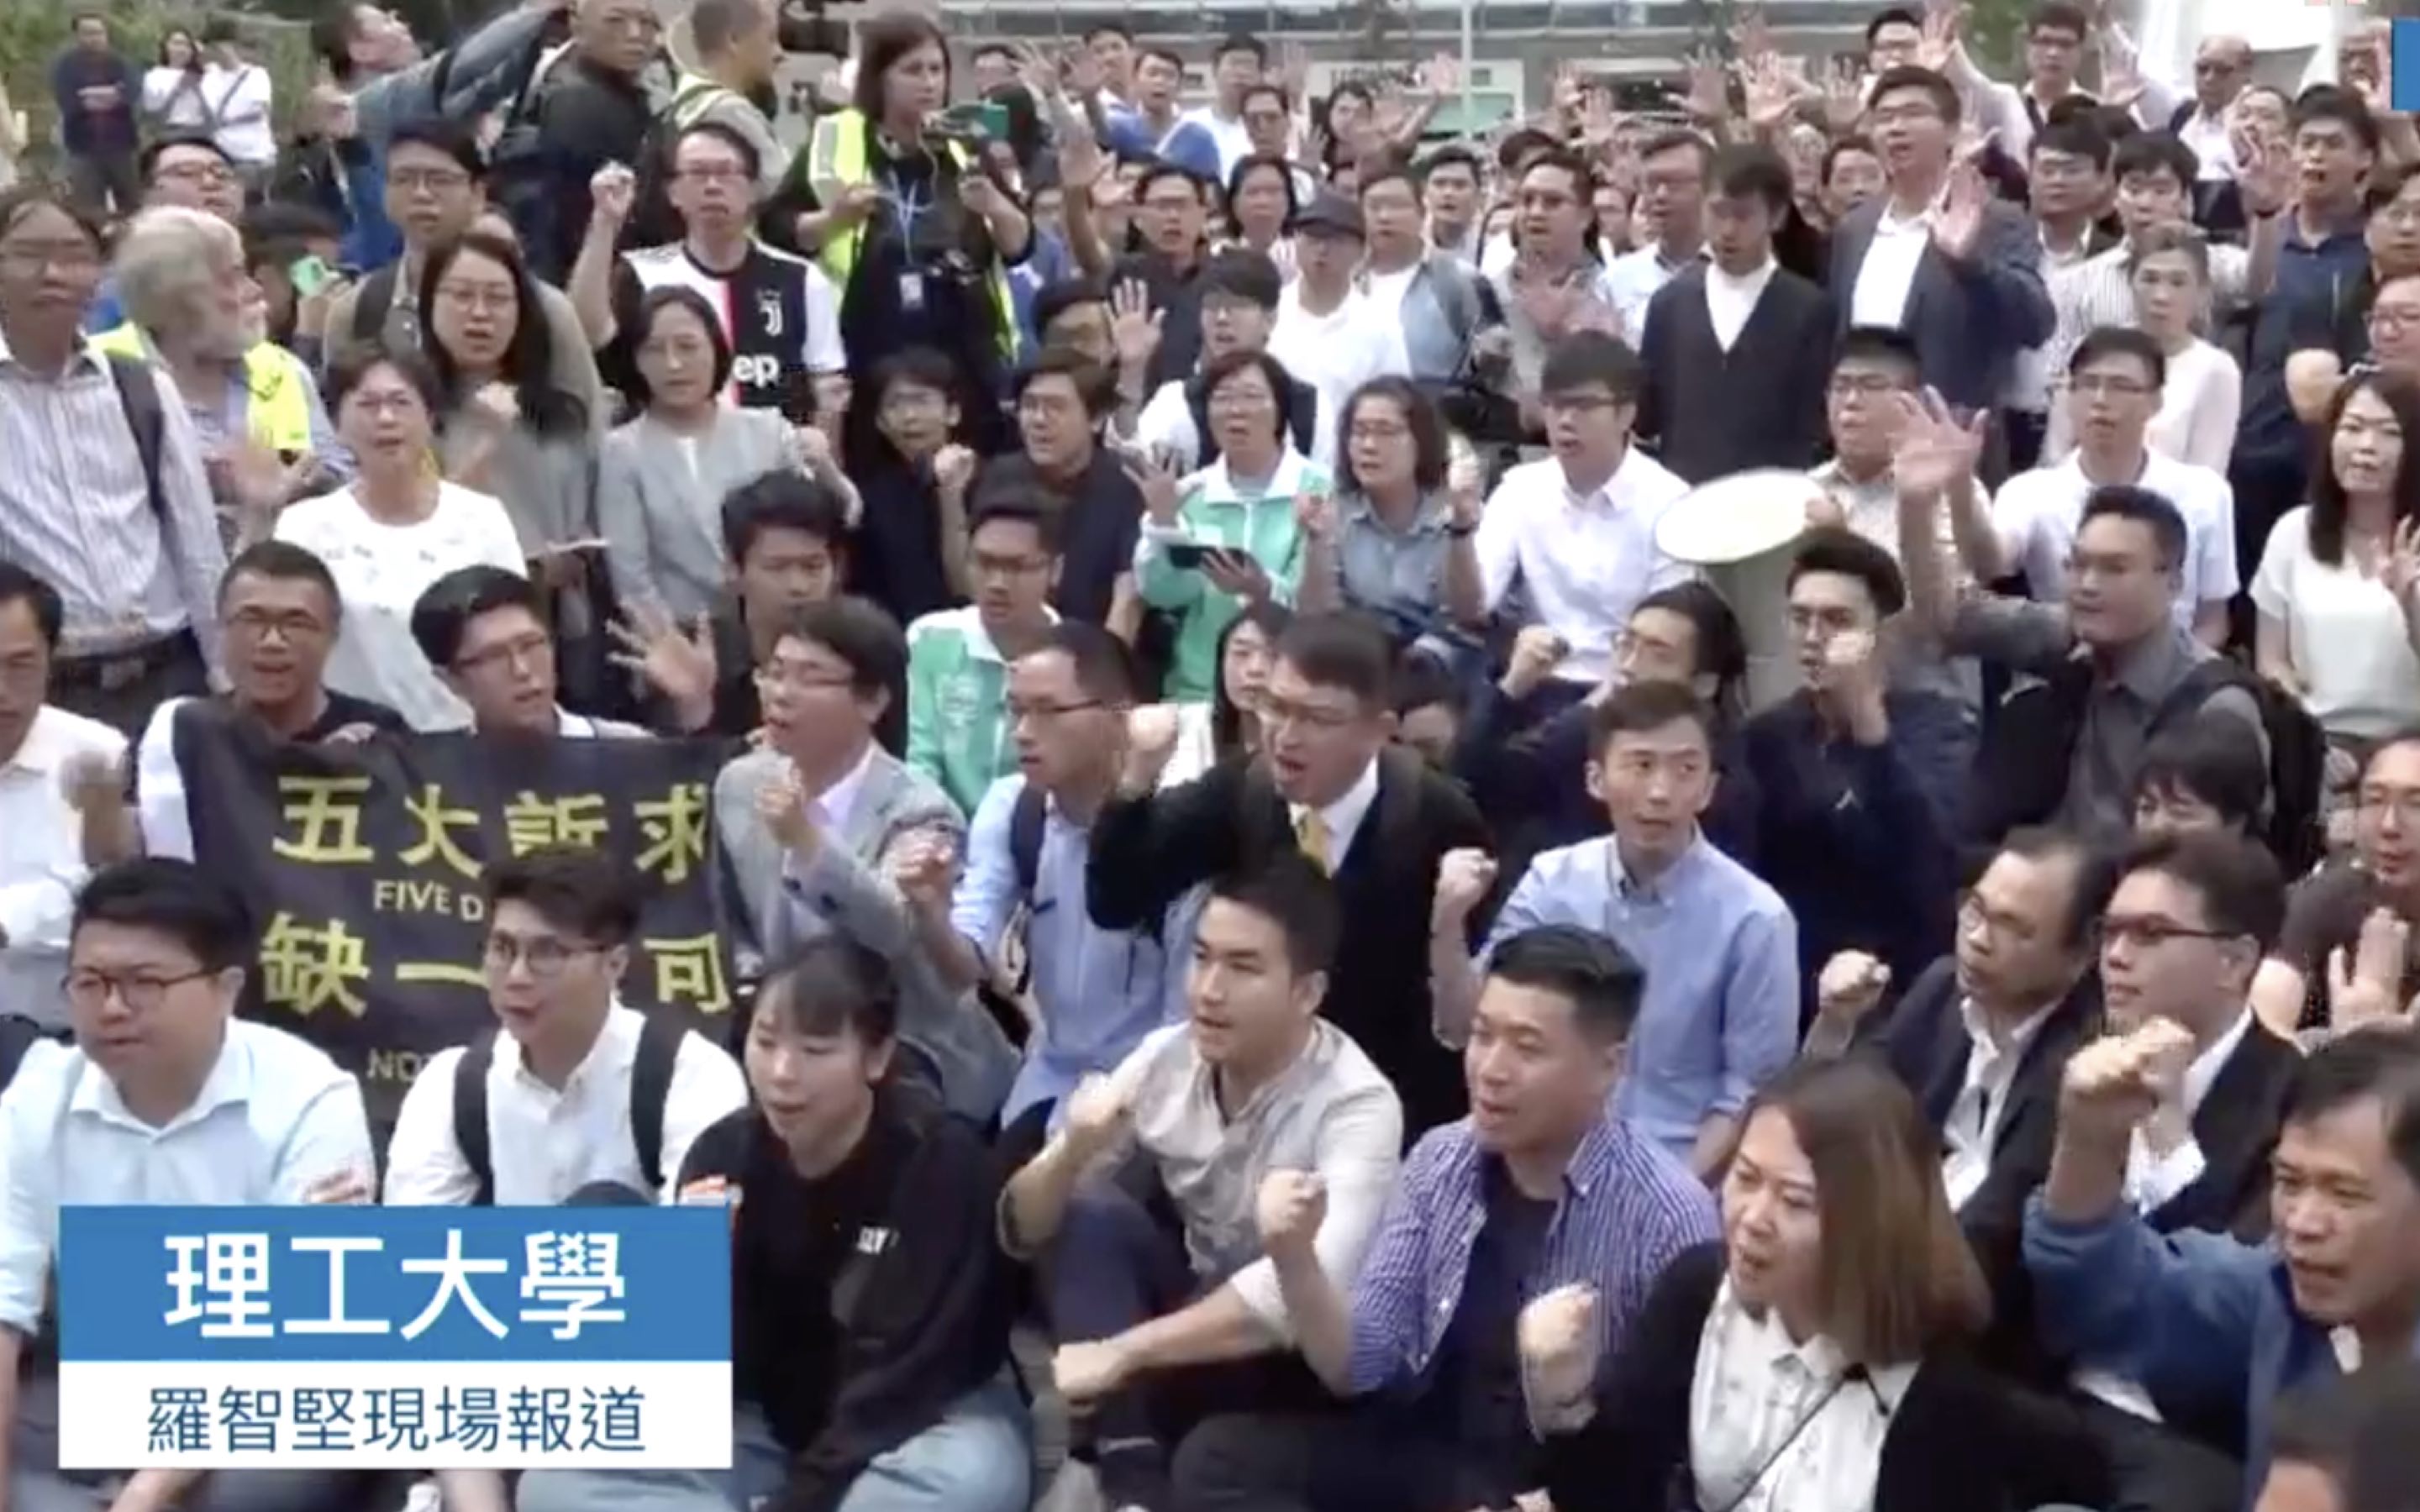 Newly-elected pro-democracy district councillors gathered in Tsim Sha Tsui to rally for support for those still trapped inside Polytechnic University, Screengrab via Apple Daily video.